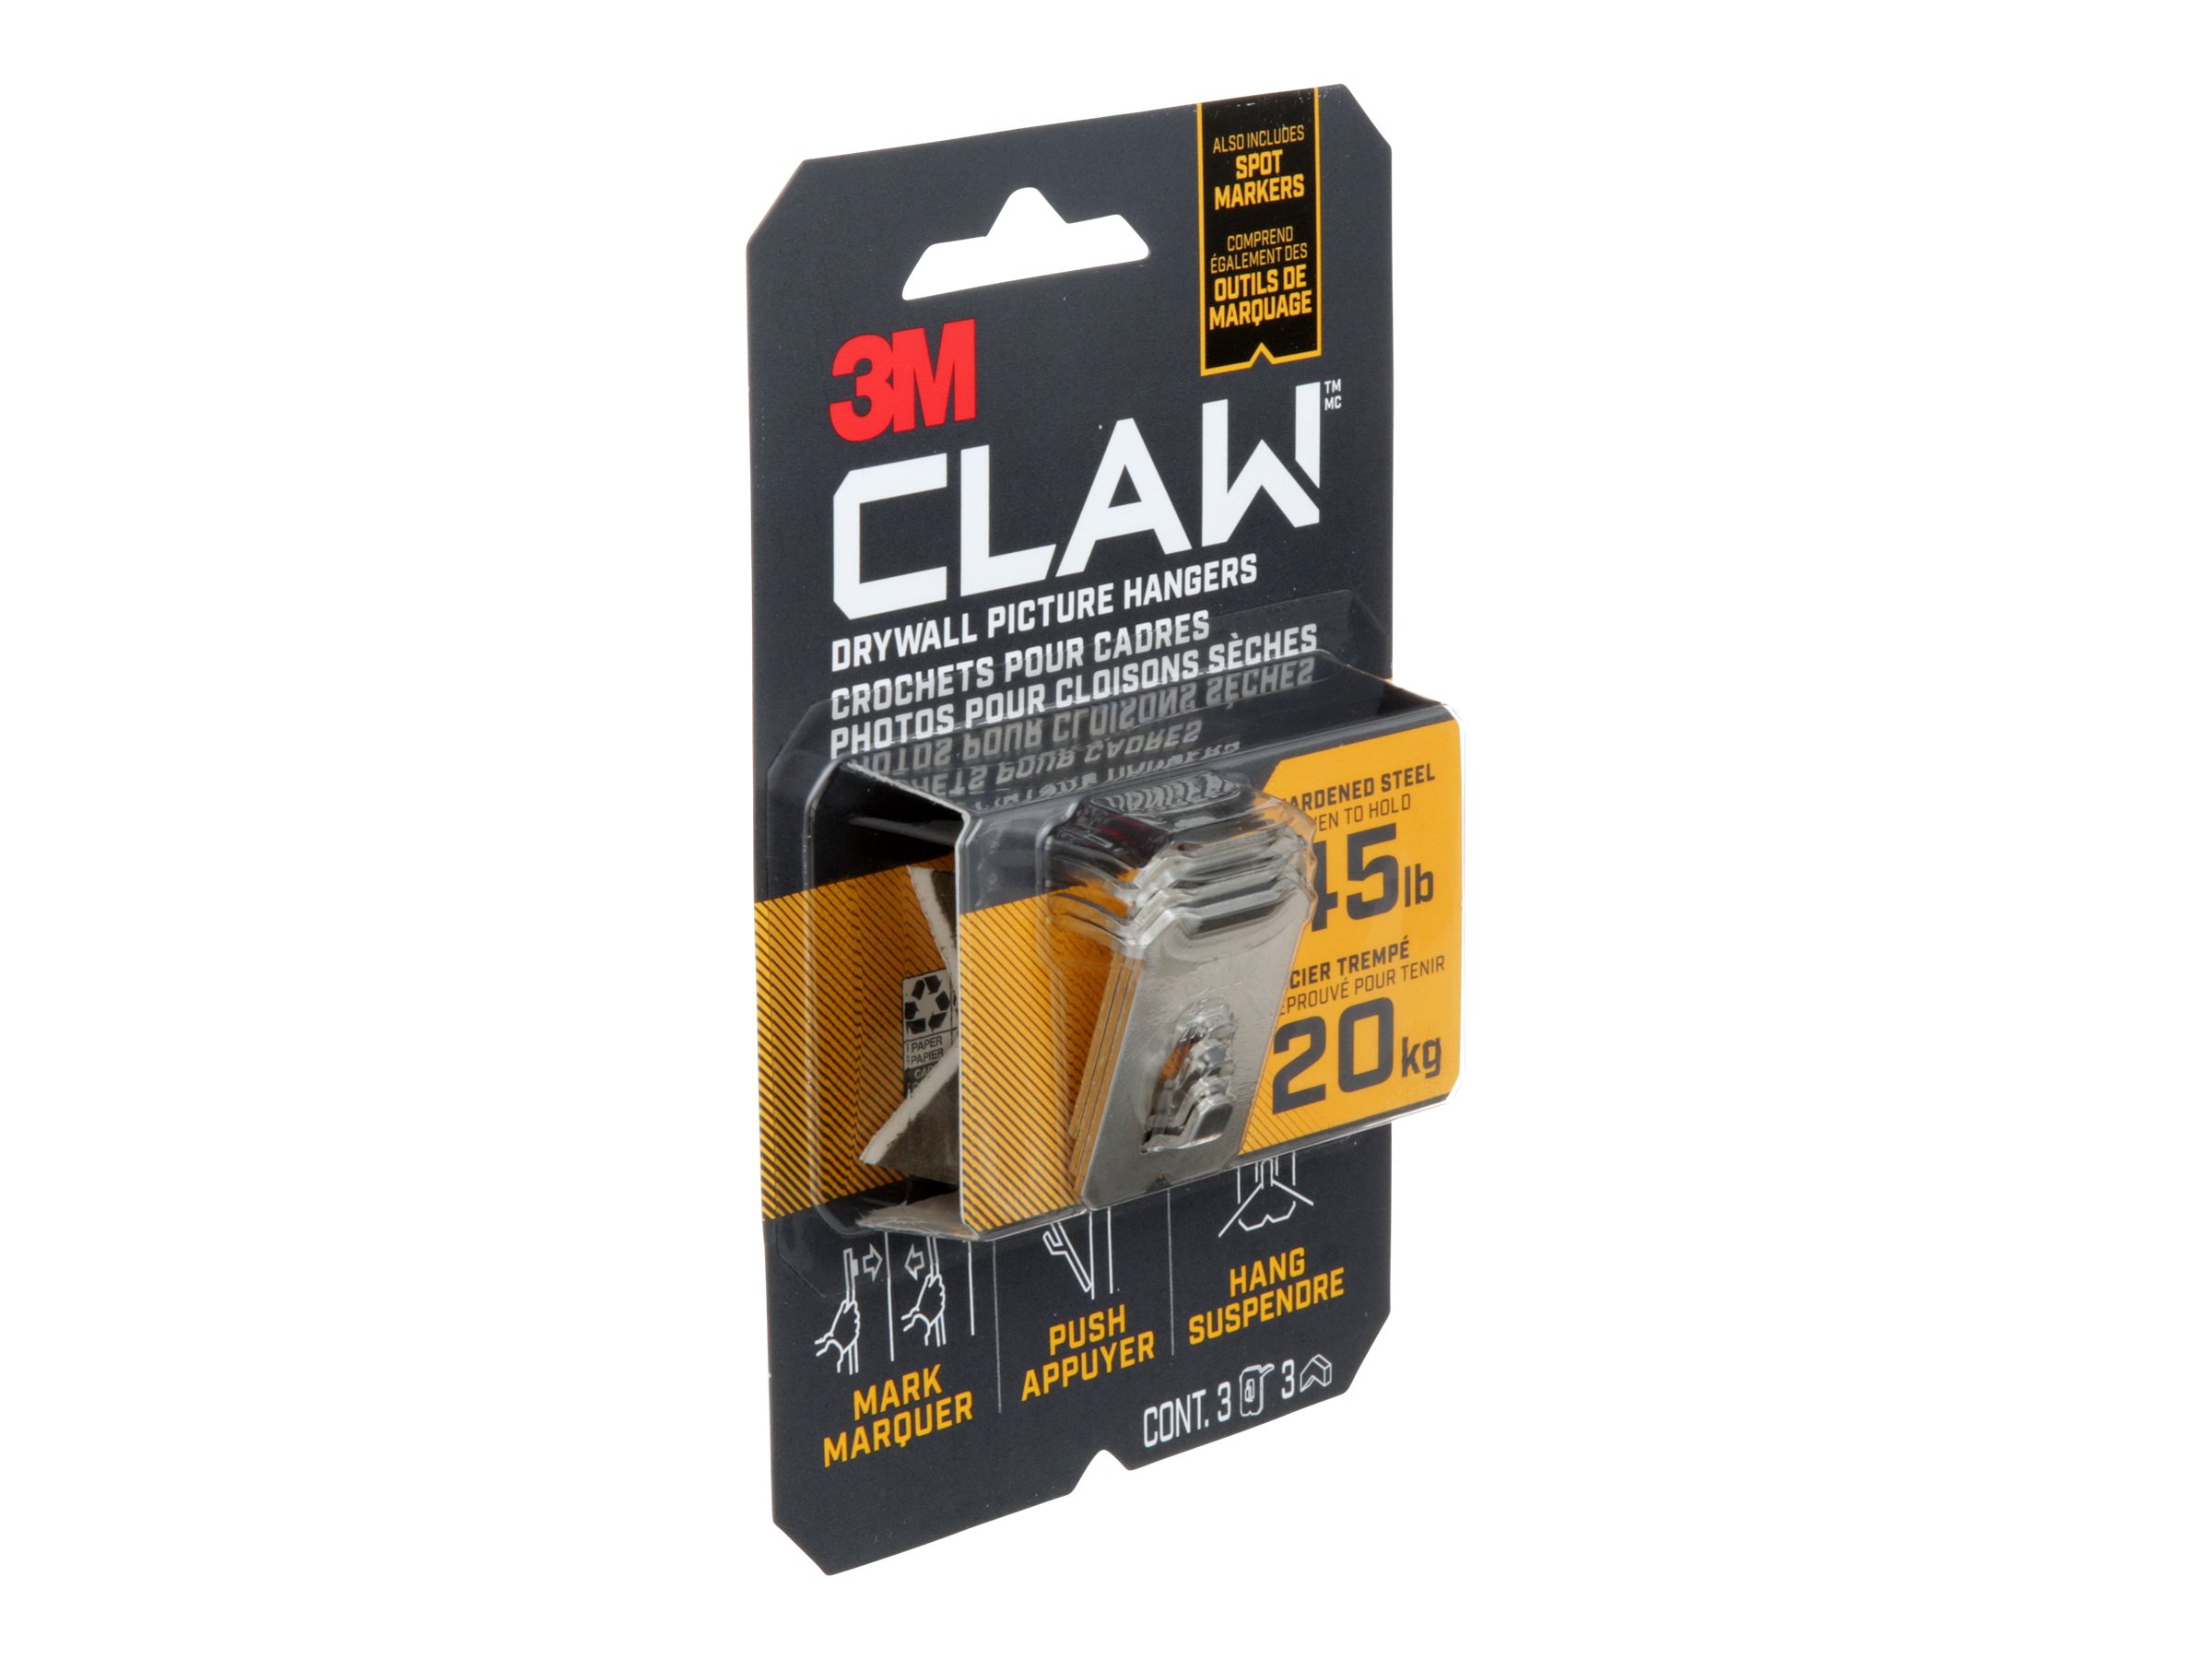 3M CLAW PICTURE HANGER 3PH45M-3EF